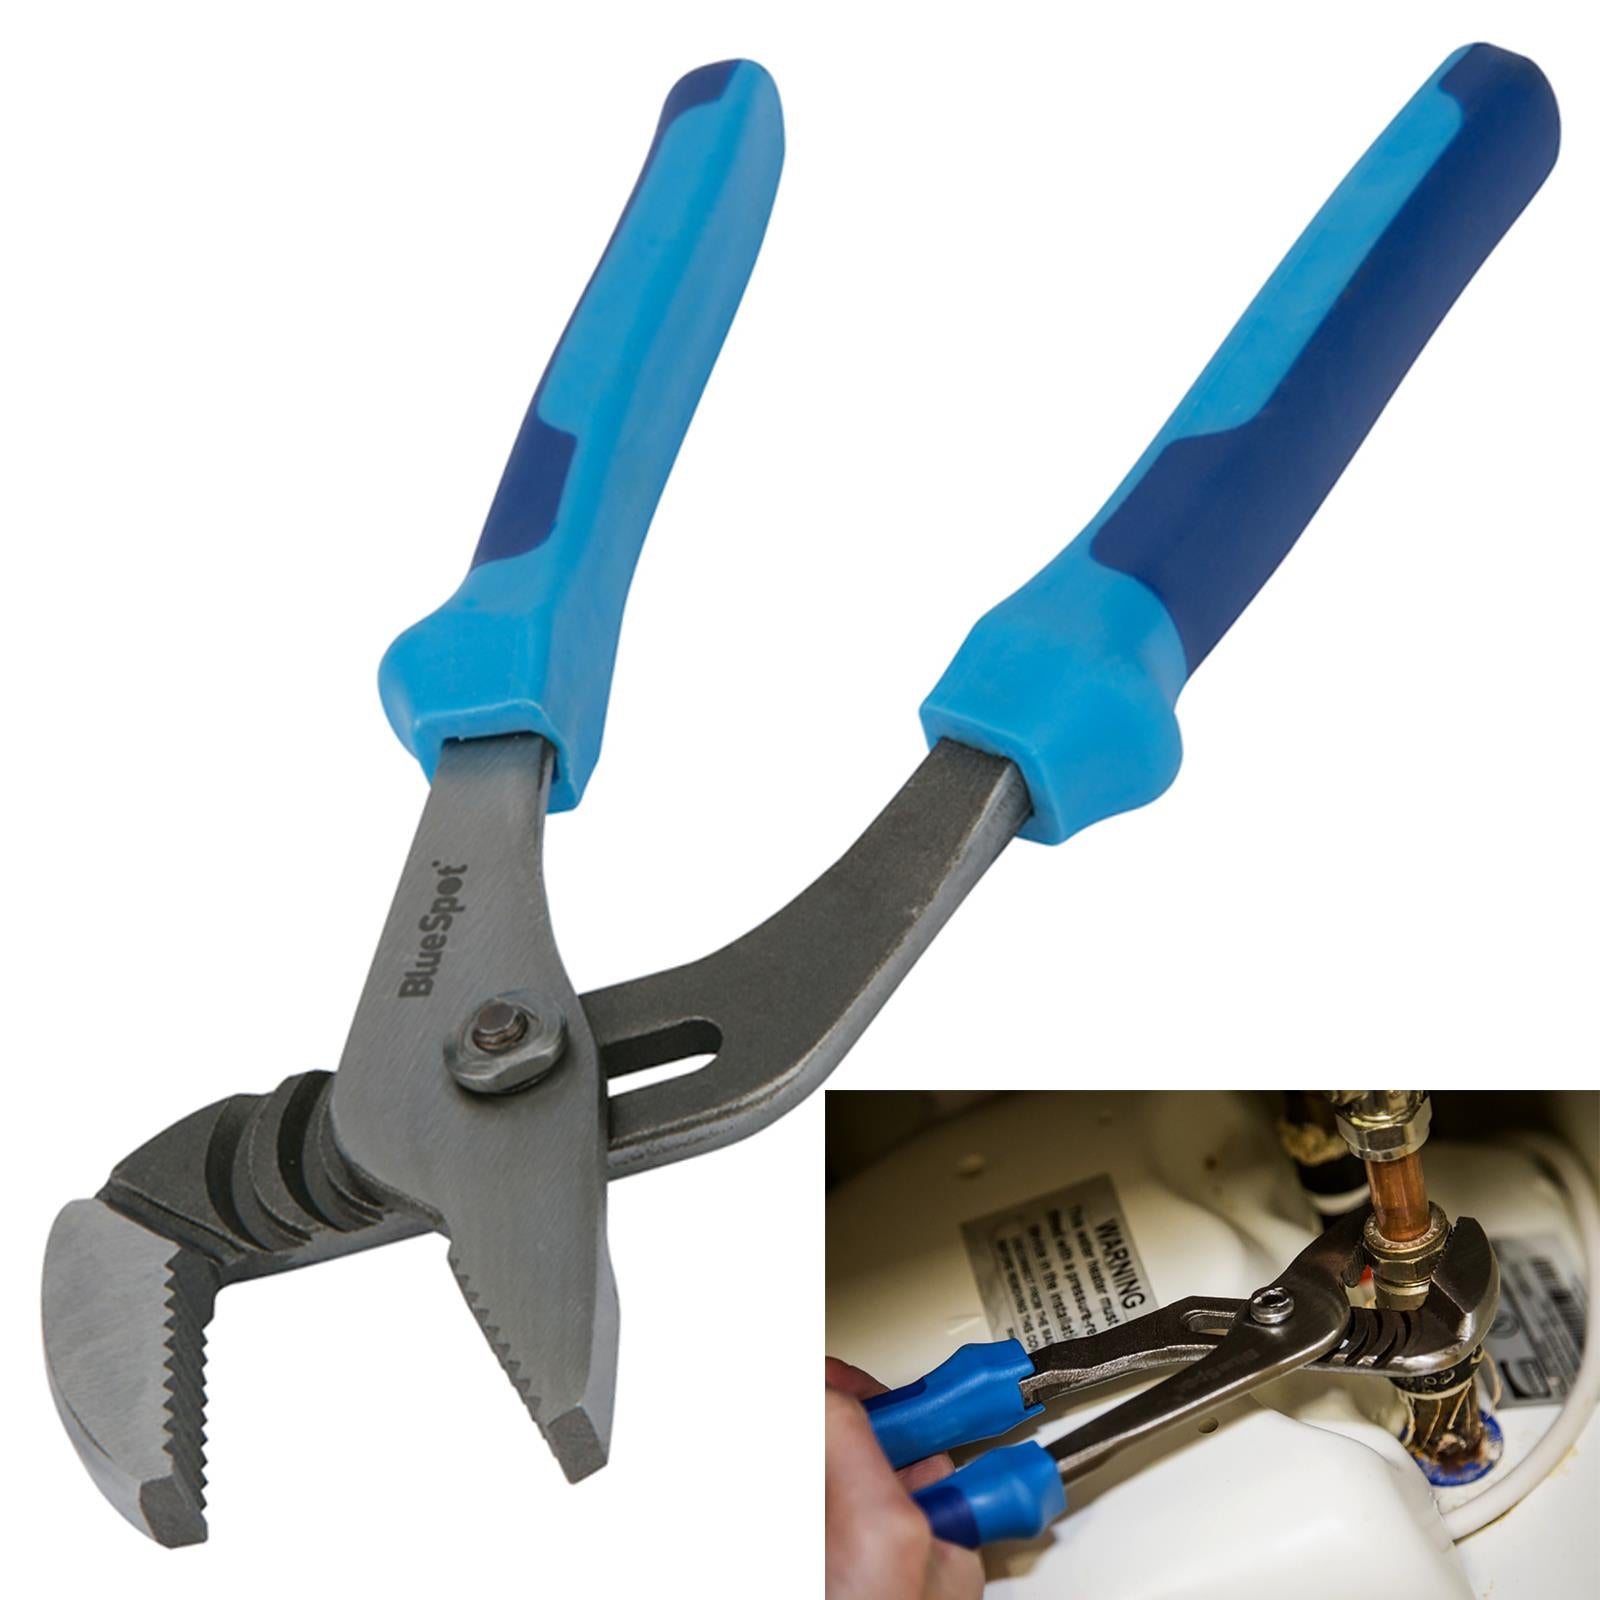 BlueSpot Water Pump Pliers Groove Joint  250mm 10" 32mm Jaw Capacity